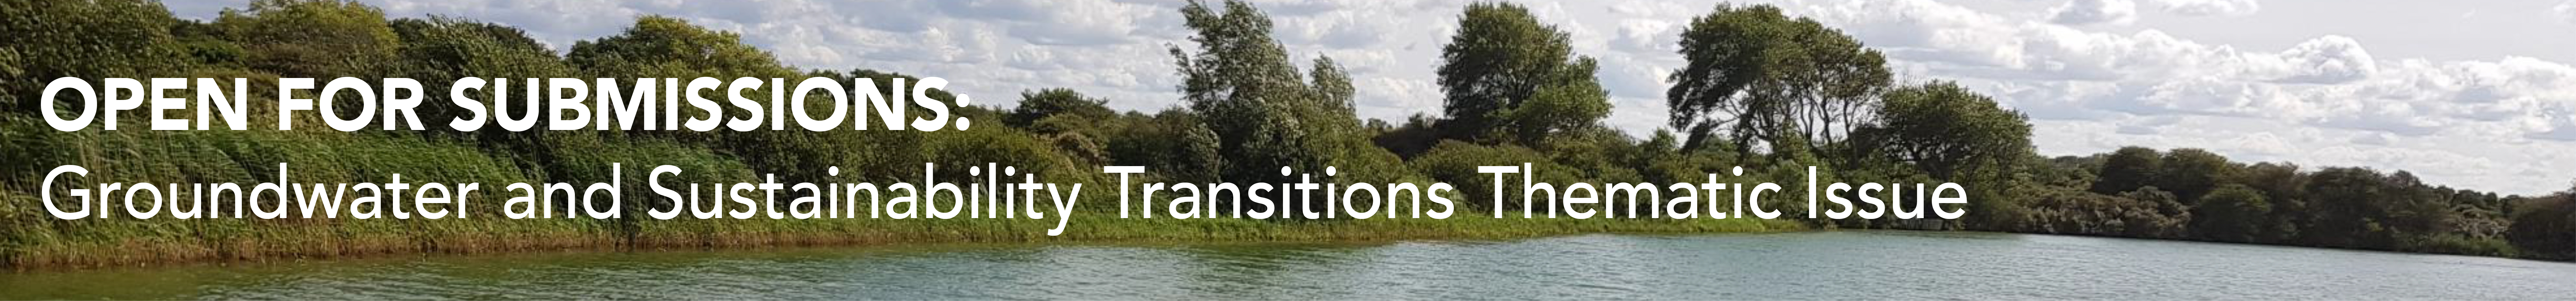 Groundwater and Sustainability Transitions Thematic Issue